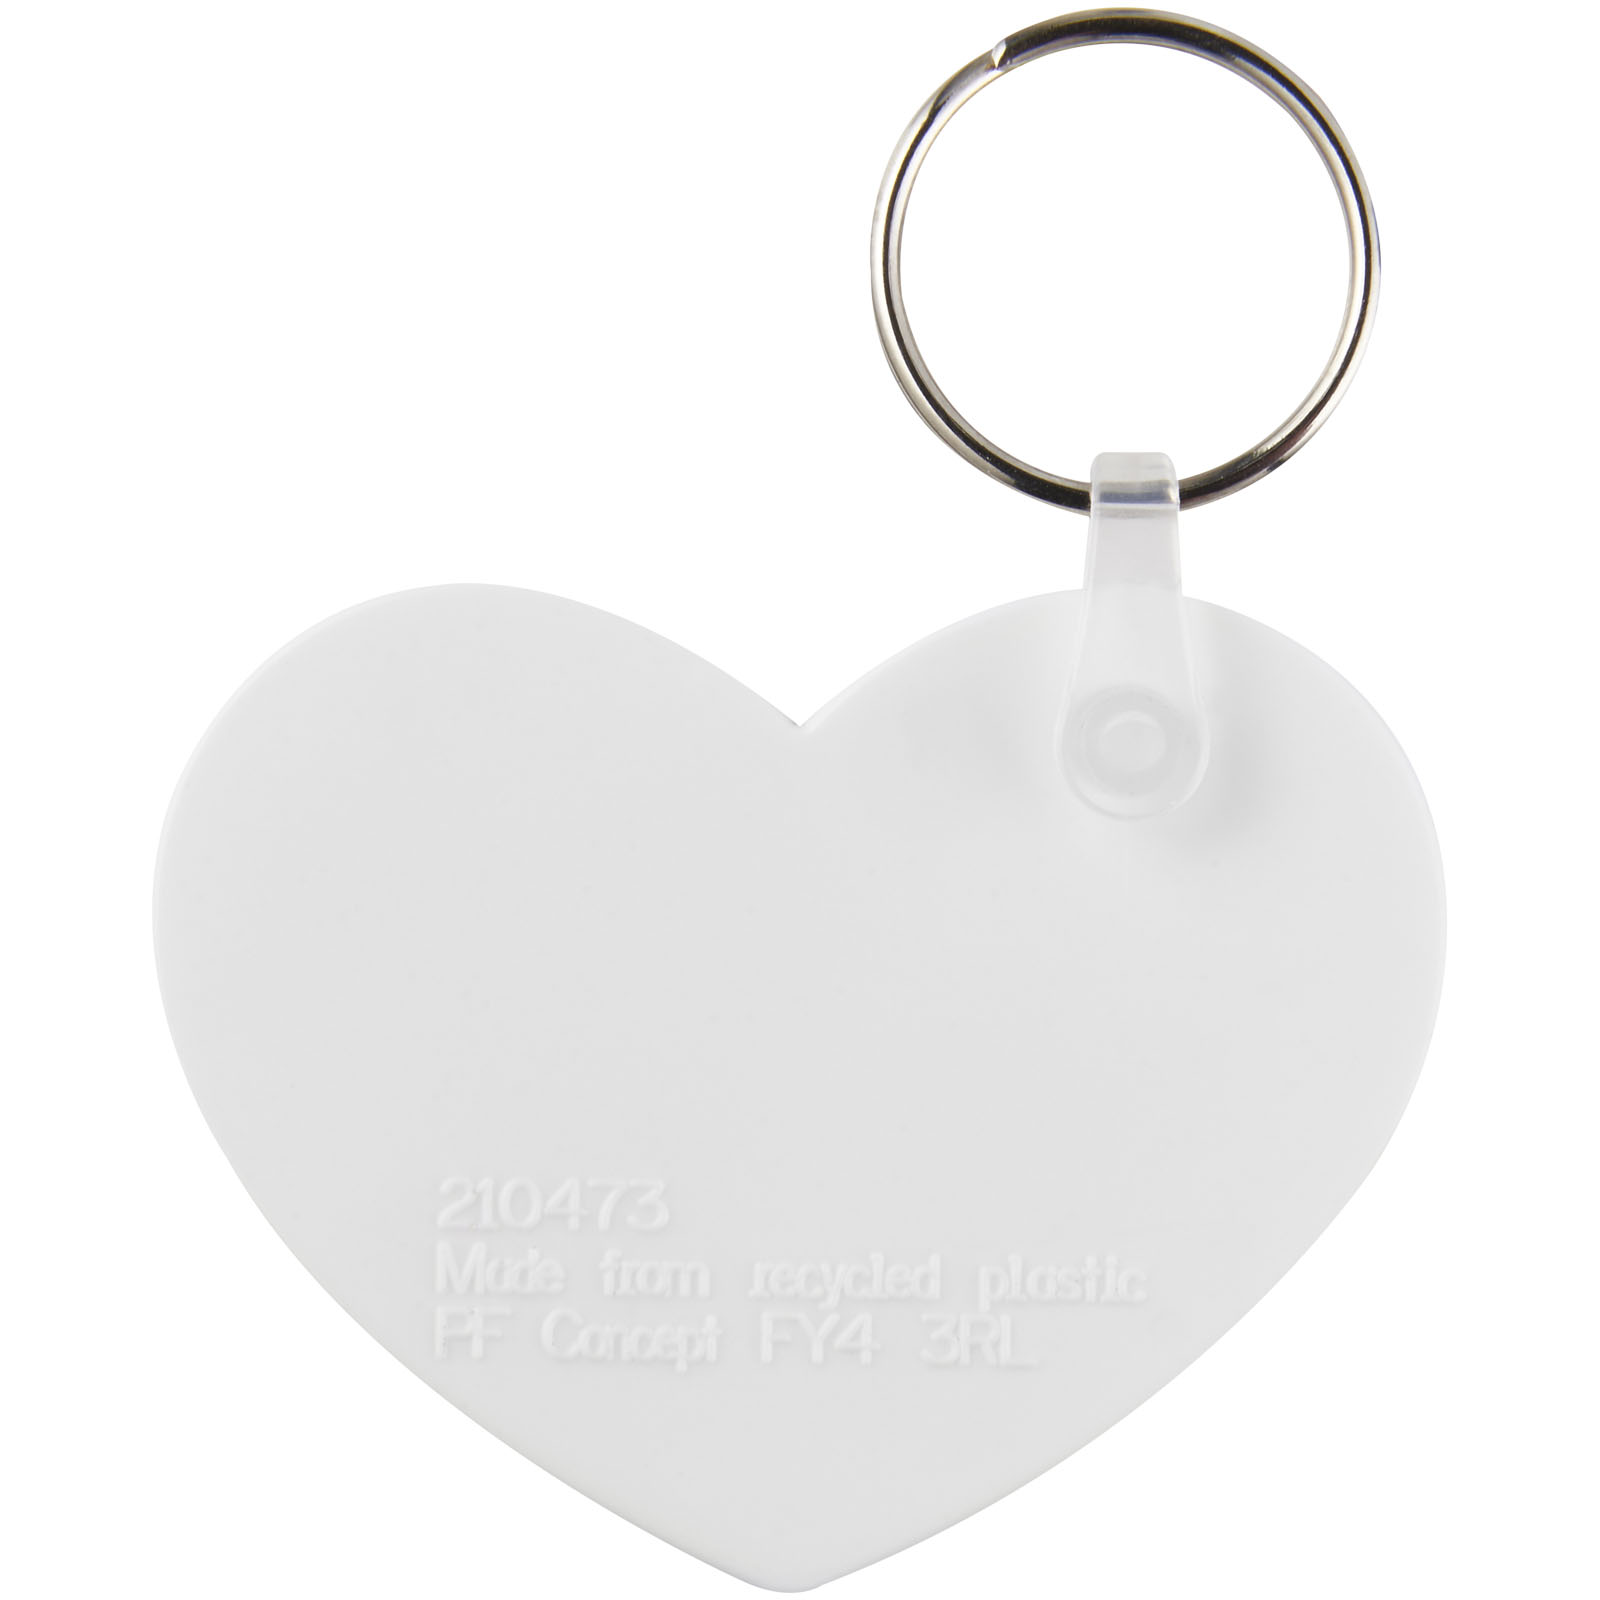 Advertising Keychains & Keyrings - Tait heart-shaped recycled keychain - 2